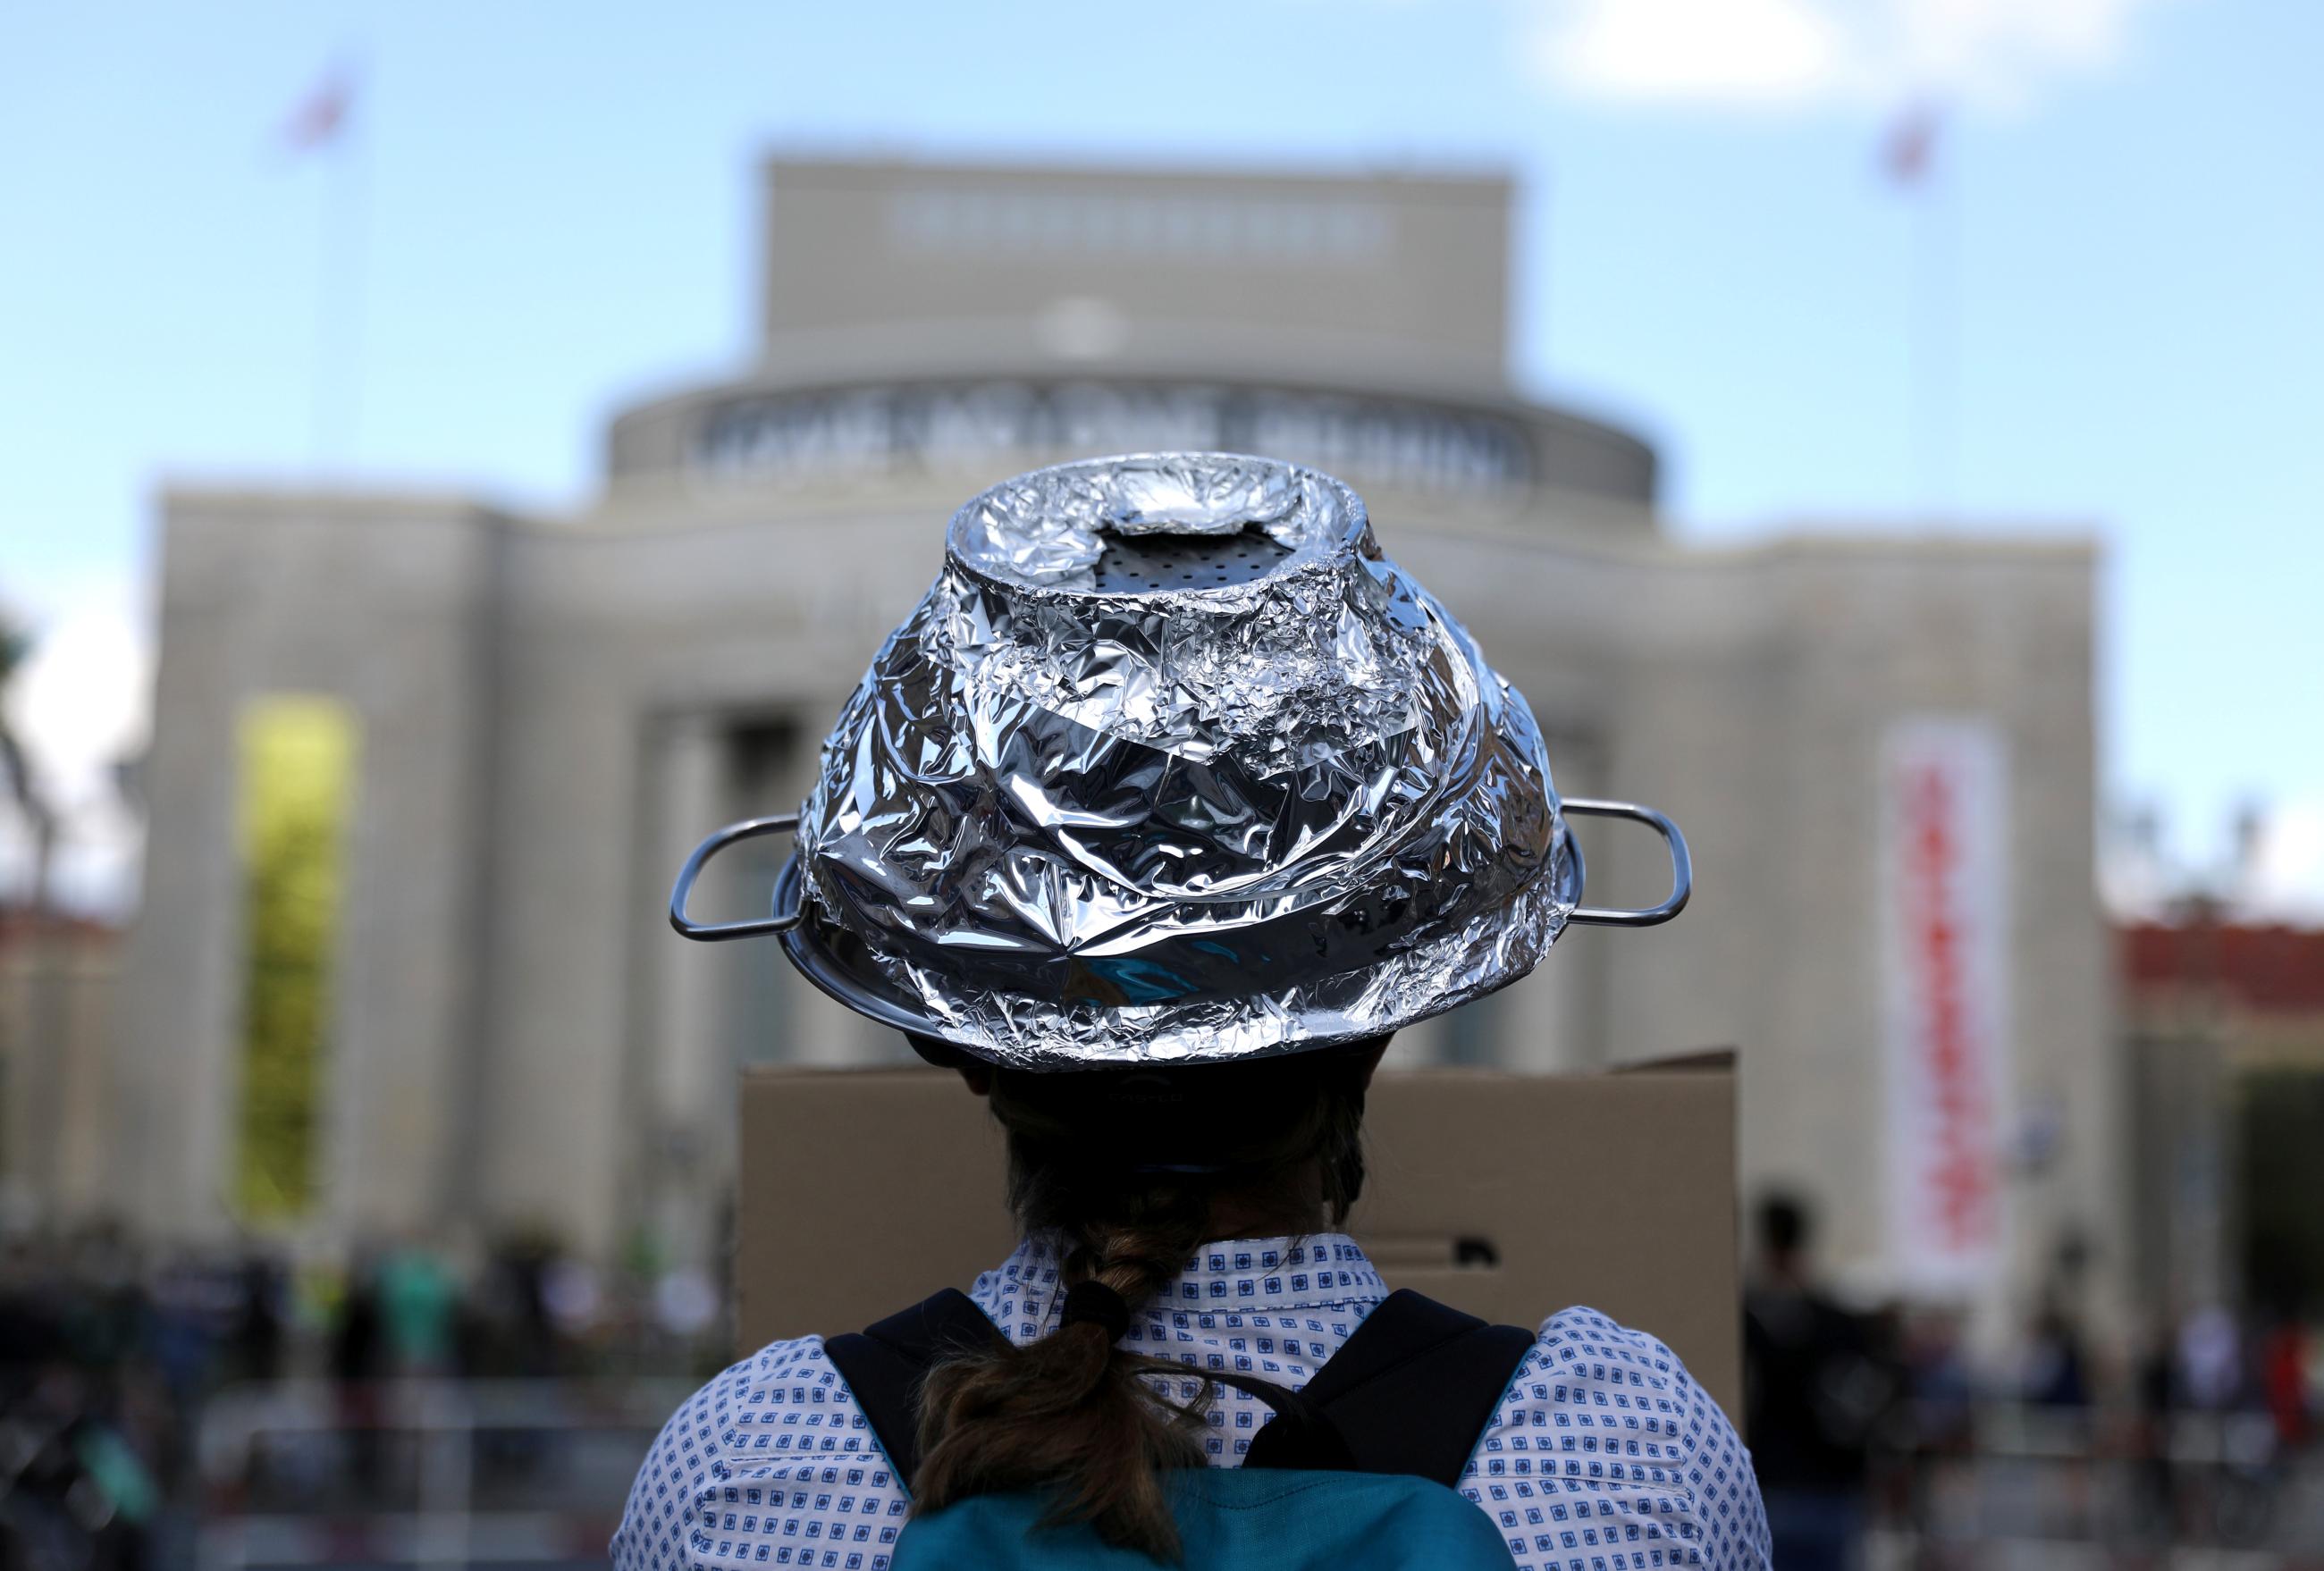  A woman attends a protest of conspiracy theorists and other demonstrators at Rosa Luxemburg Platz, amid the spread of the coronavirus disease (COVID-19), in Berlin, Germany May 9, 2020.